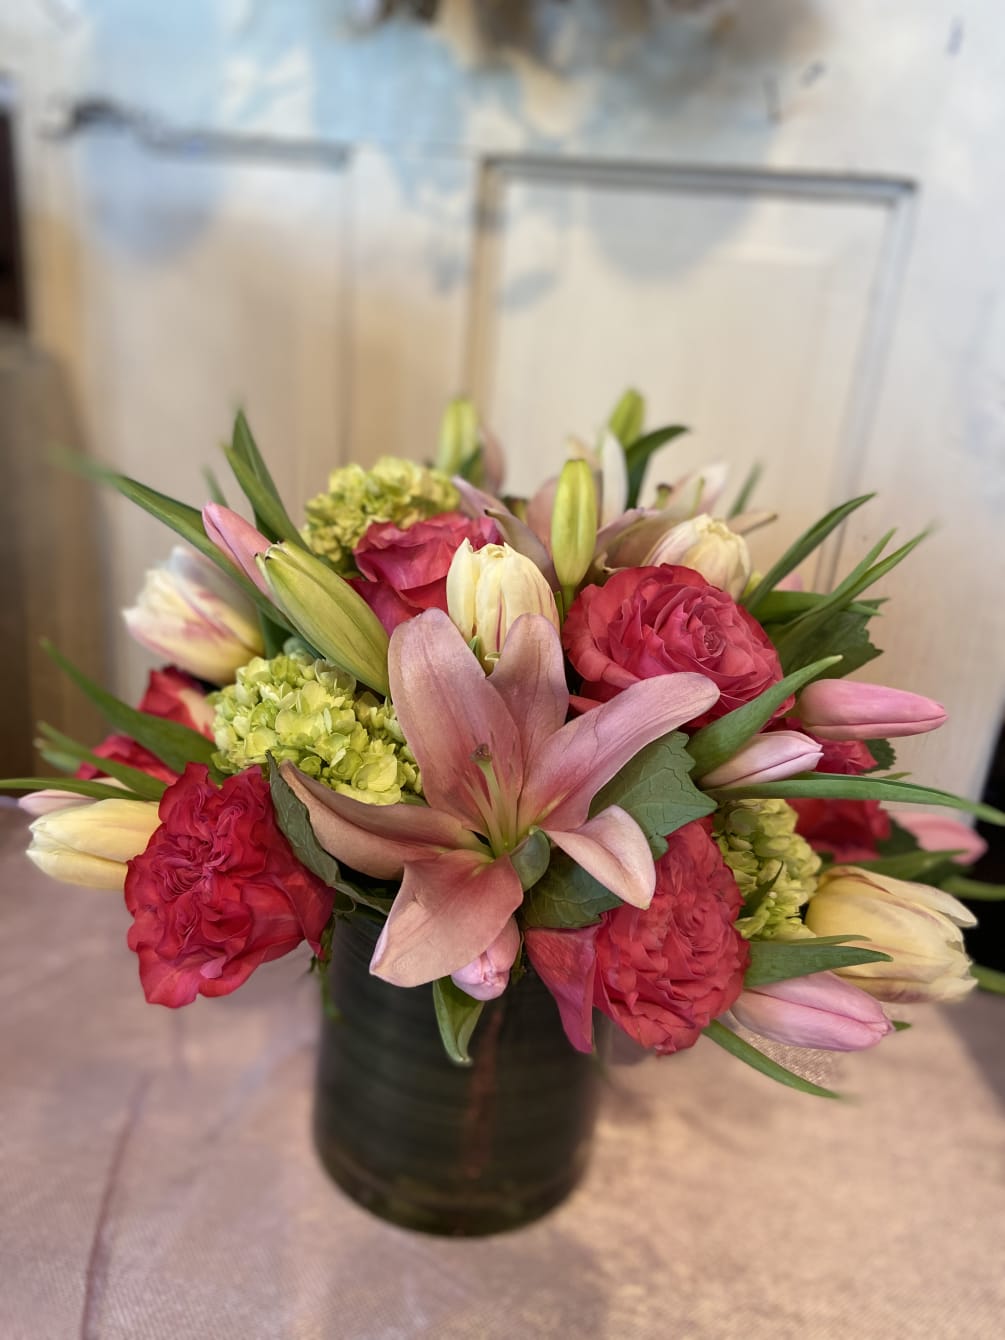 A lush collection of lilies, roses, tulips and hydrangea...guaranteed to make her